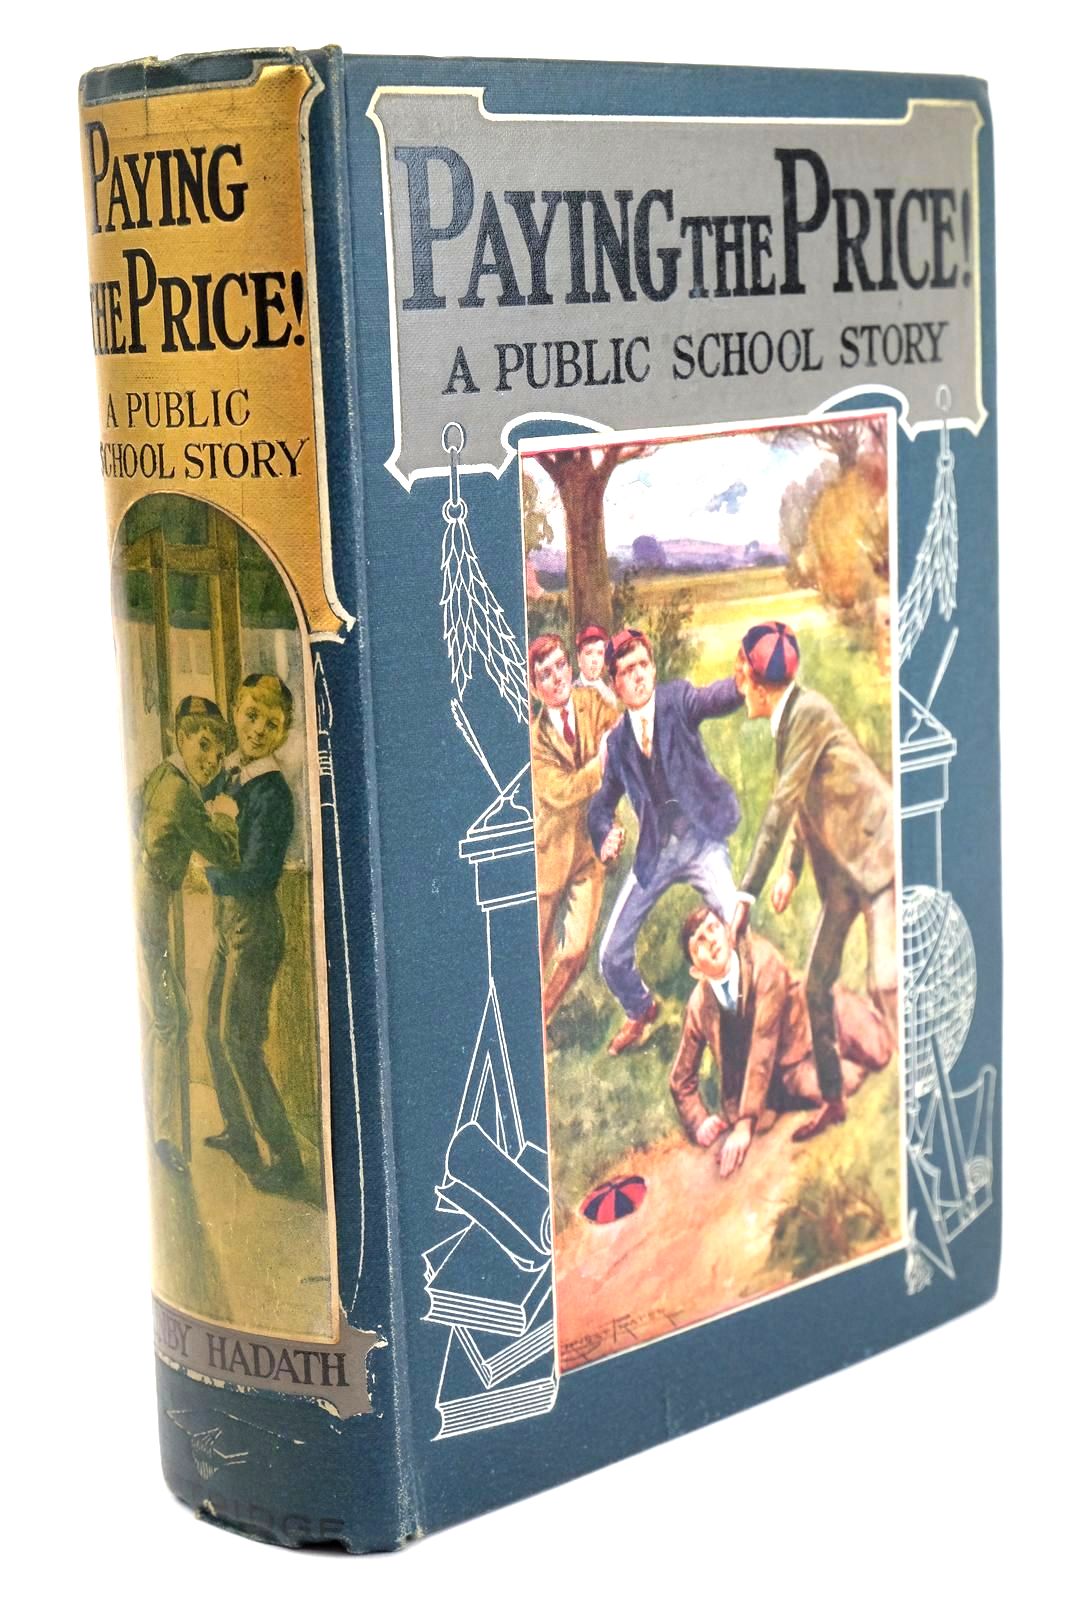 Photo of PAYING THE PRICE! written by Hadath, Gunby illustrated by Prater, Ernest published by S.W. Partridge &amp; Co. Ltd. (STOCK CODE: 1324454)  for sale by Stella & Rose's Books